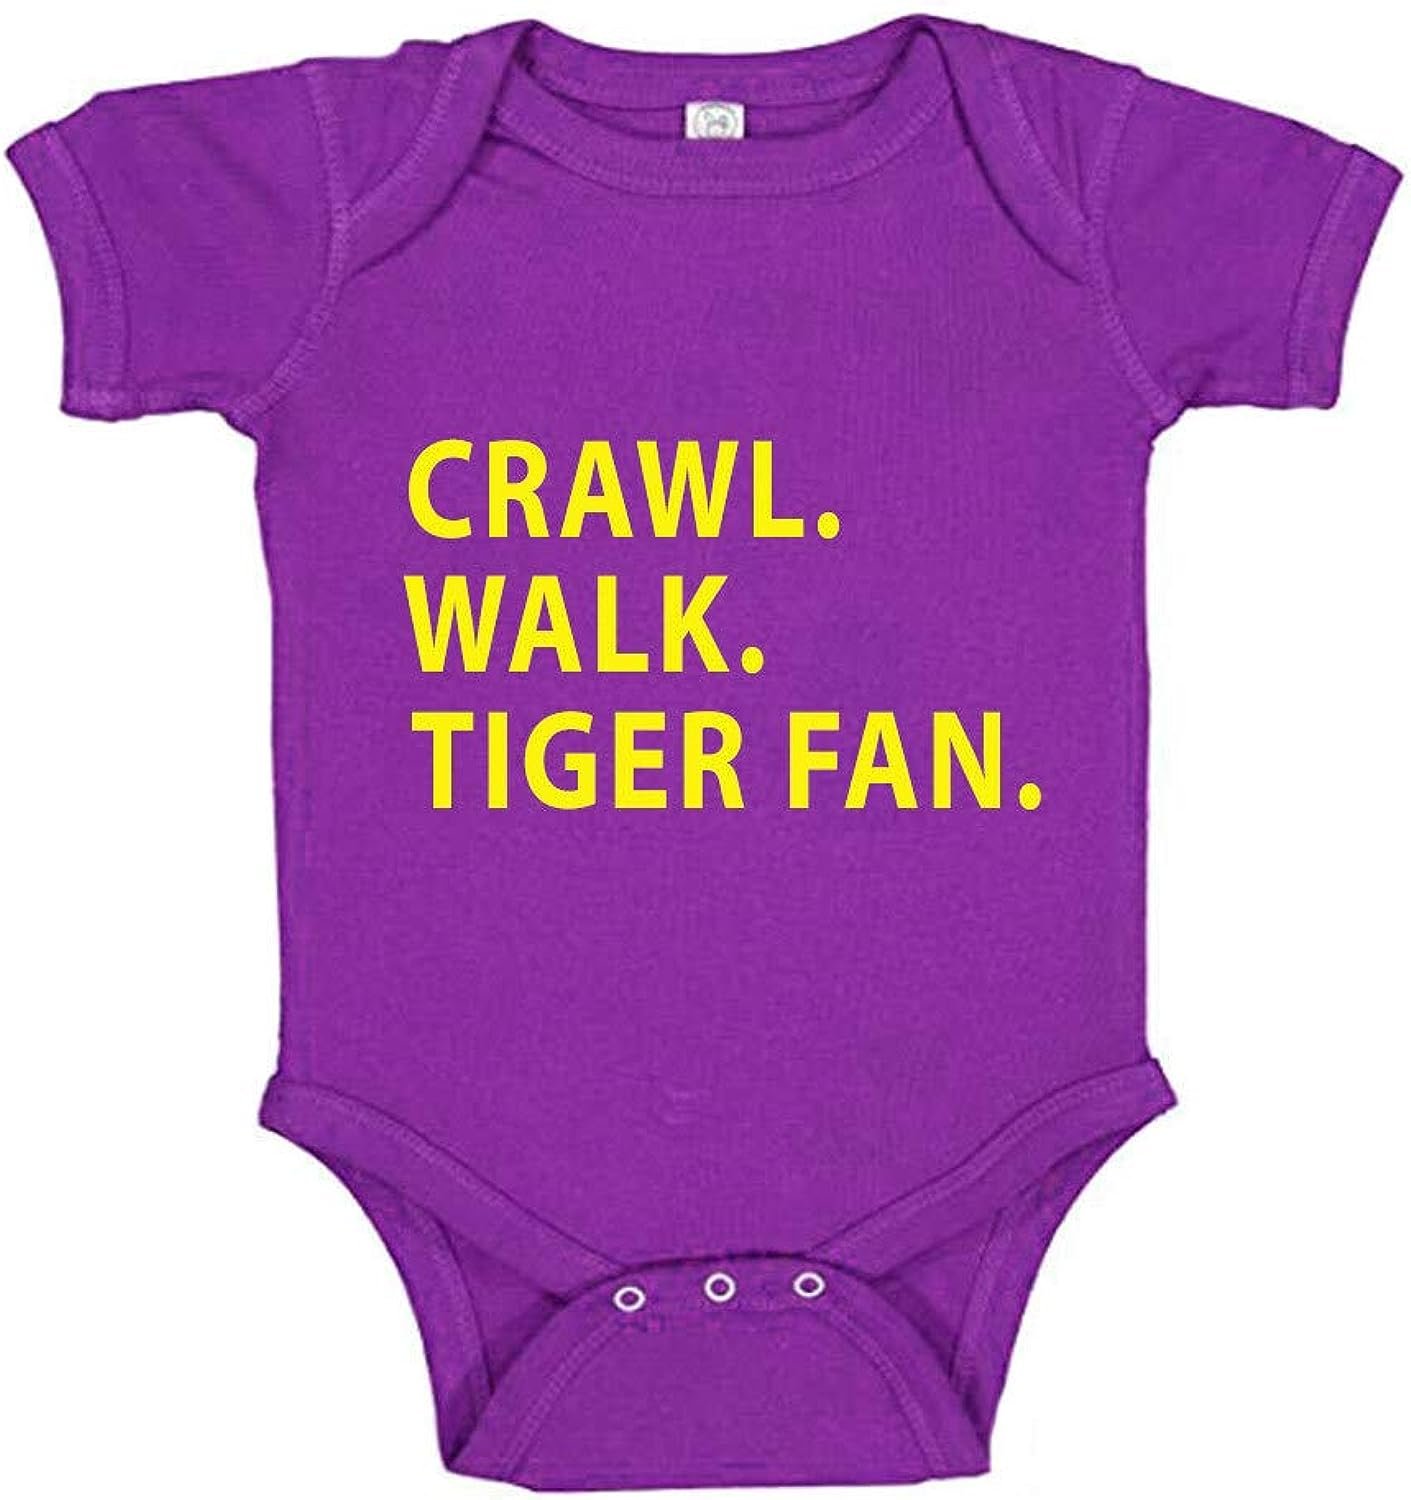 Southern Sisters Crawl Walk Tiger Fan Baby Romper in Purple and Gold